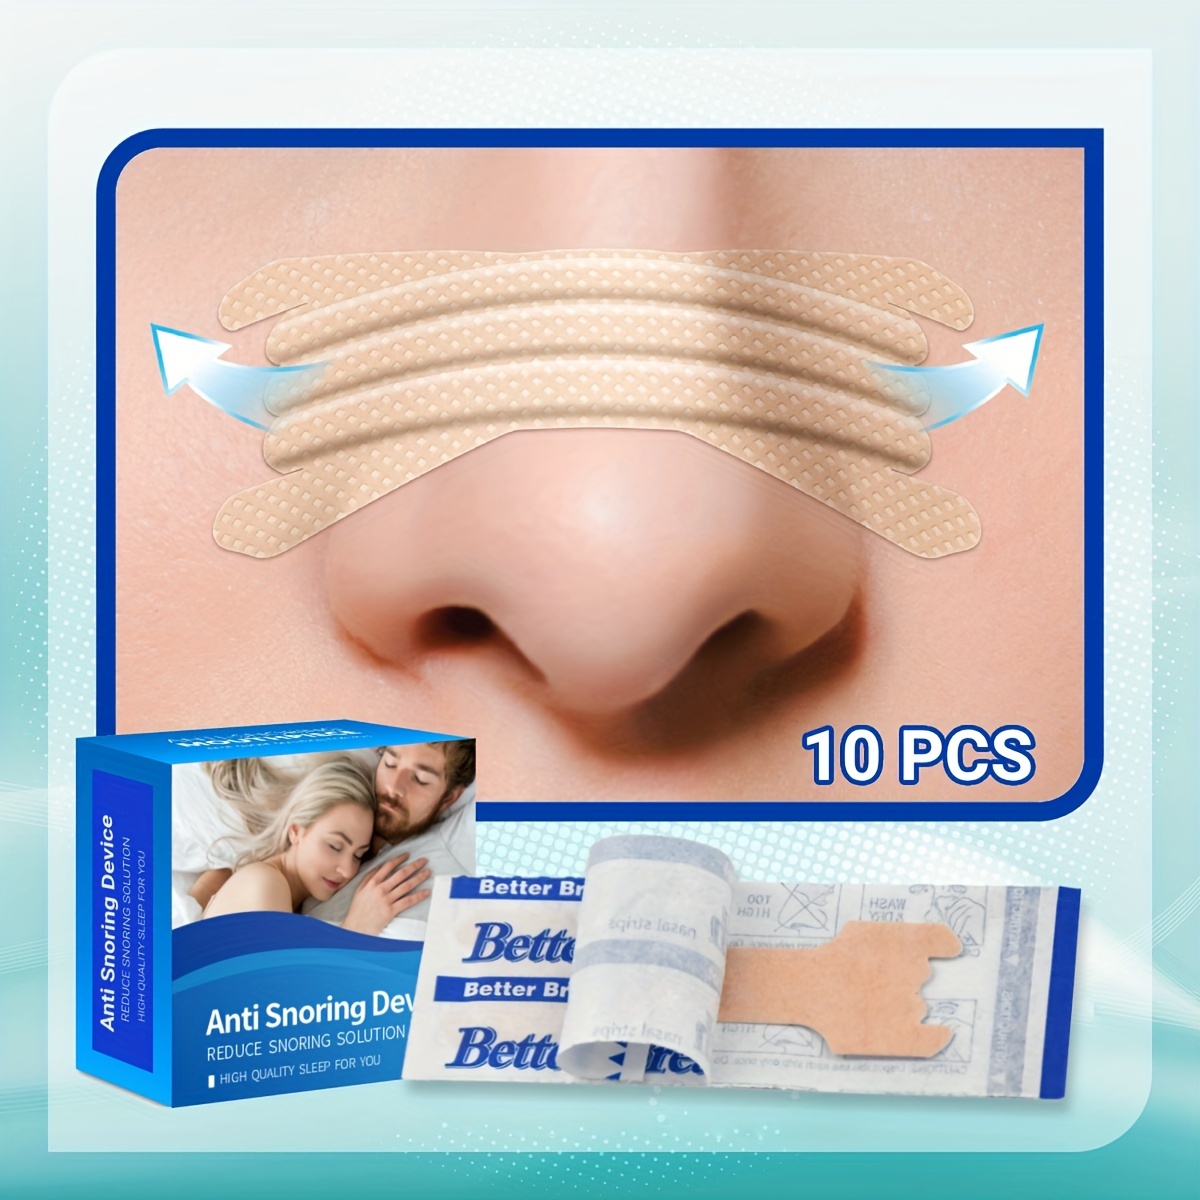 

Instantly Relieve Nasal Congestion And Snoring With Anti-snoring Nose Strips